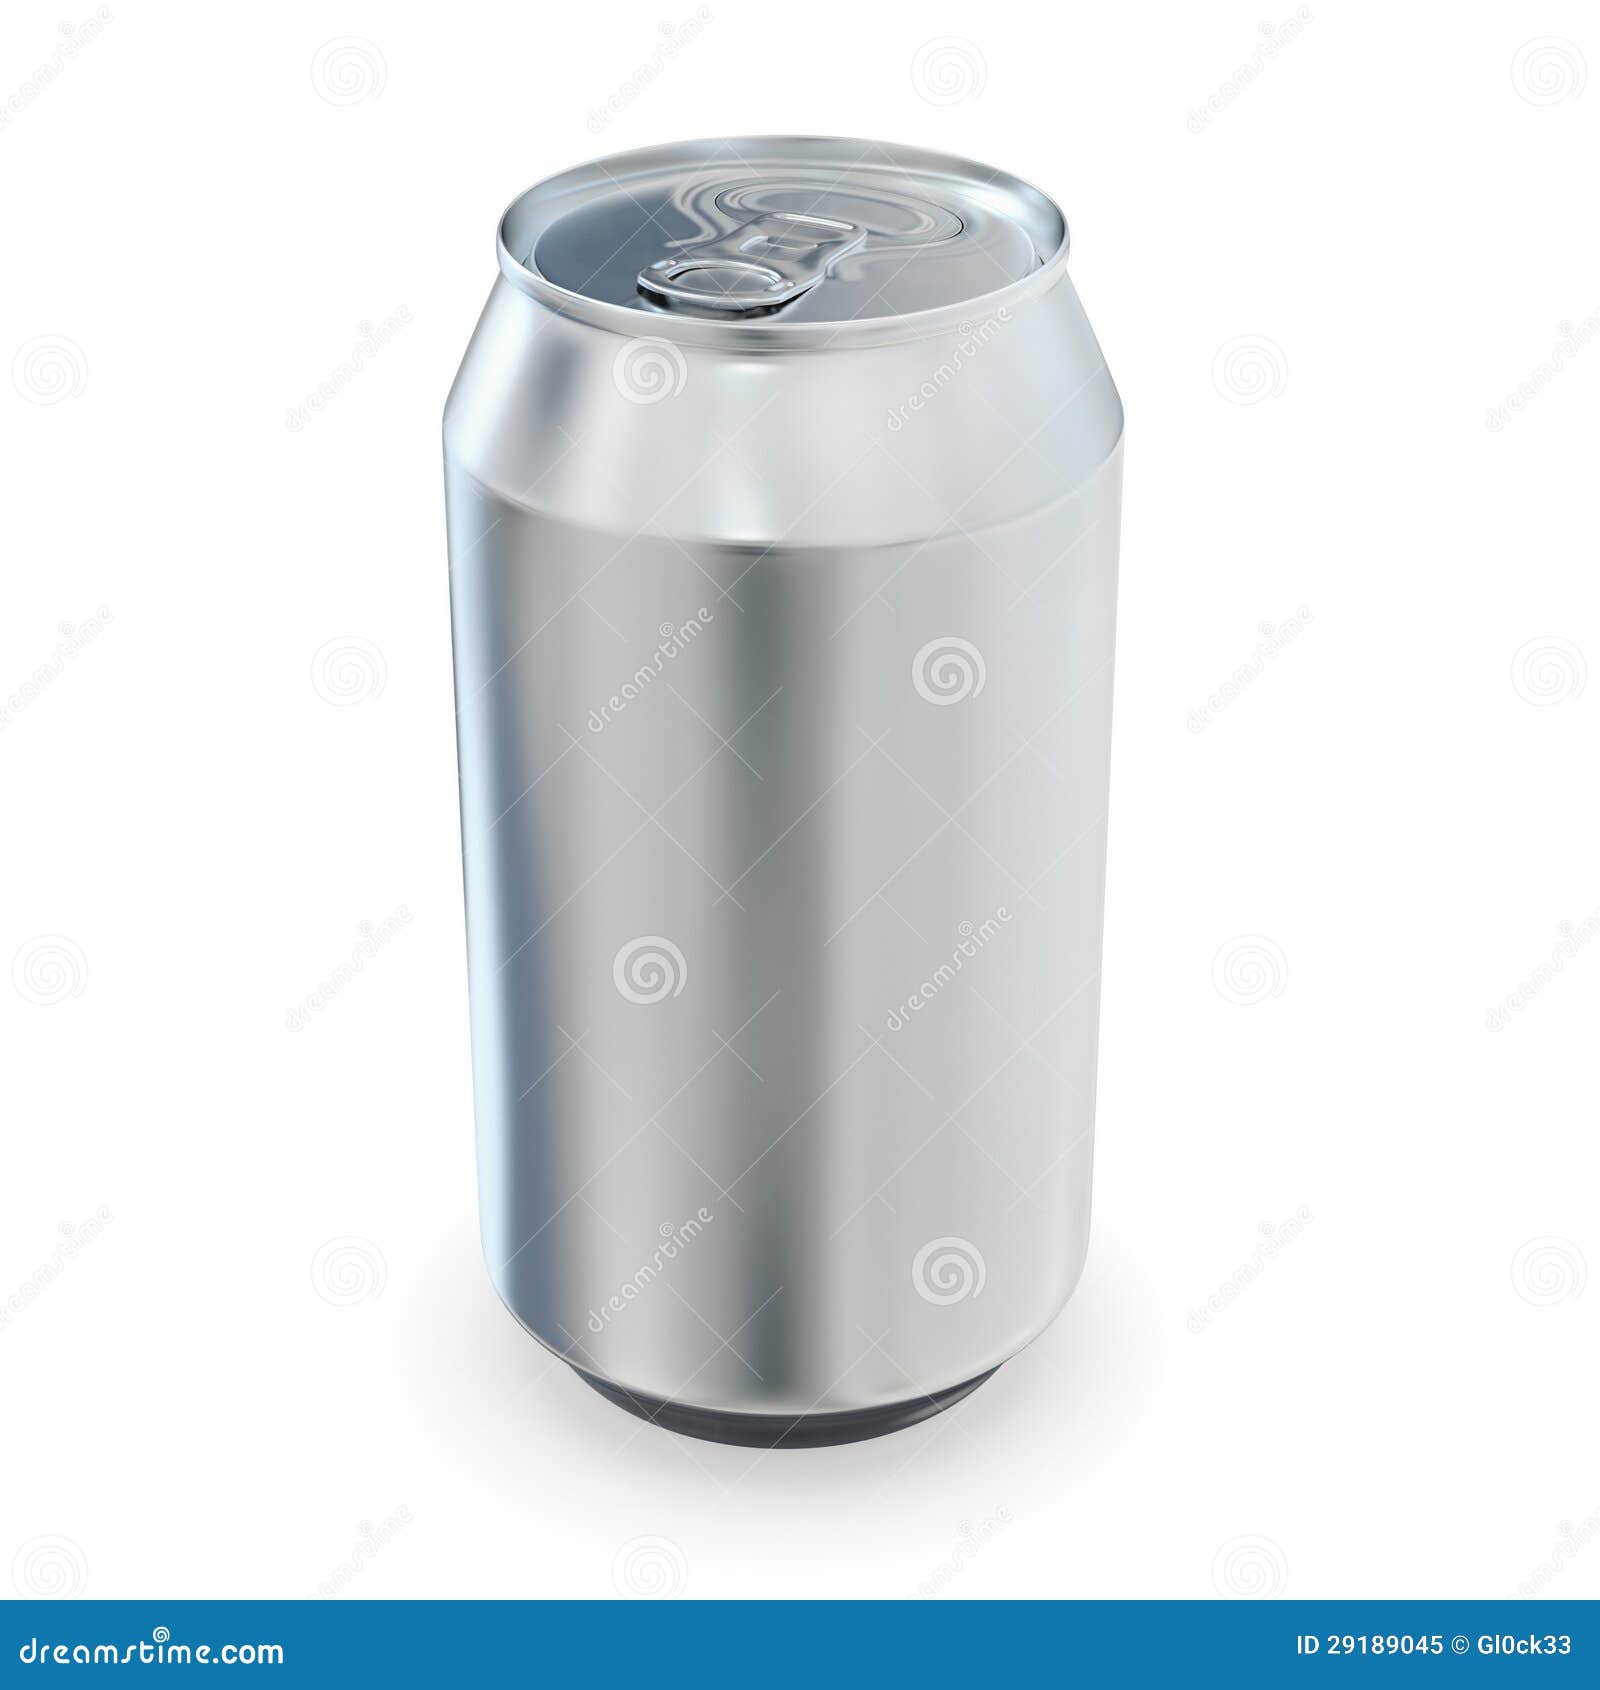 Aluminum beer cans stock illustration. Illustration of pack - 29189045